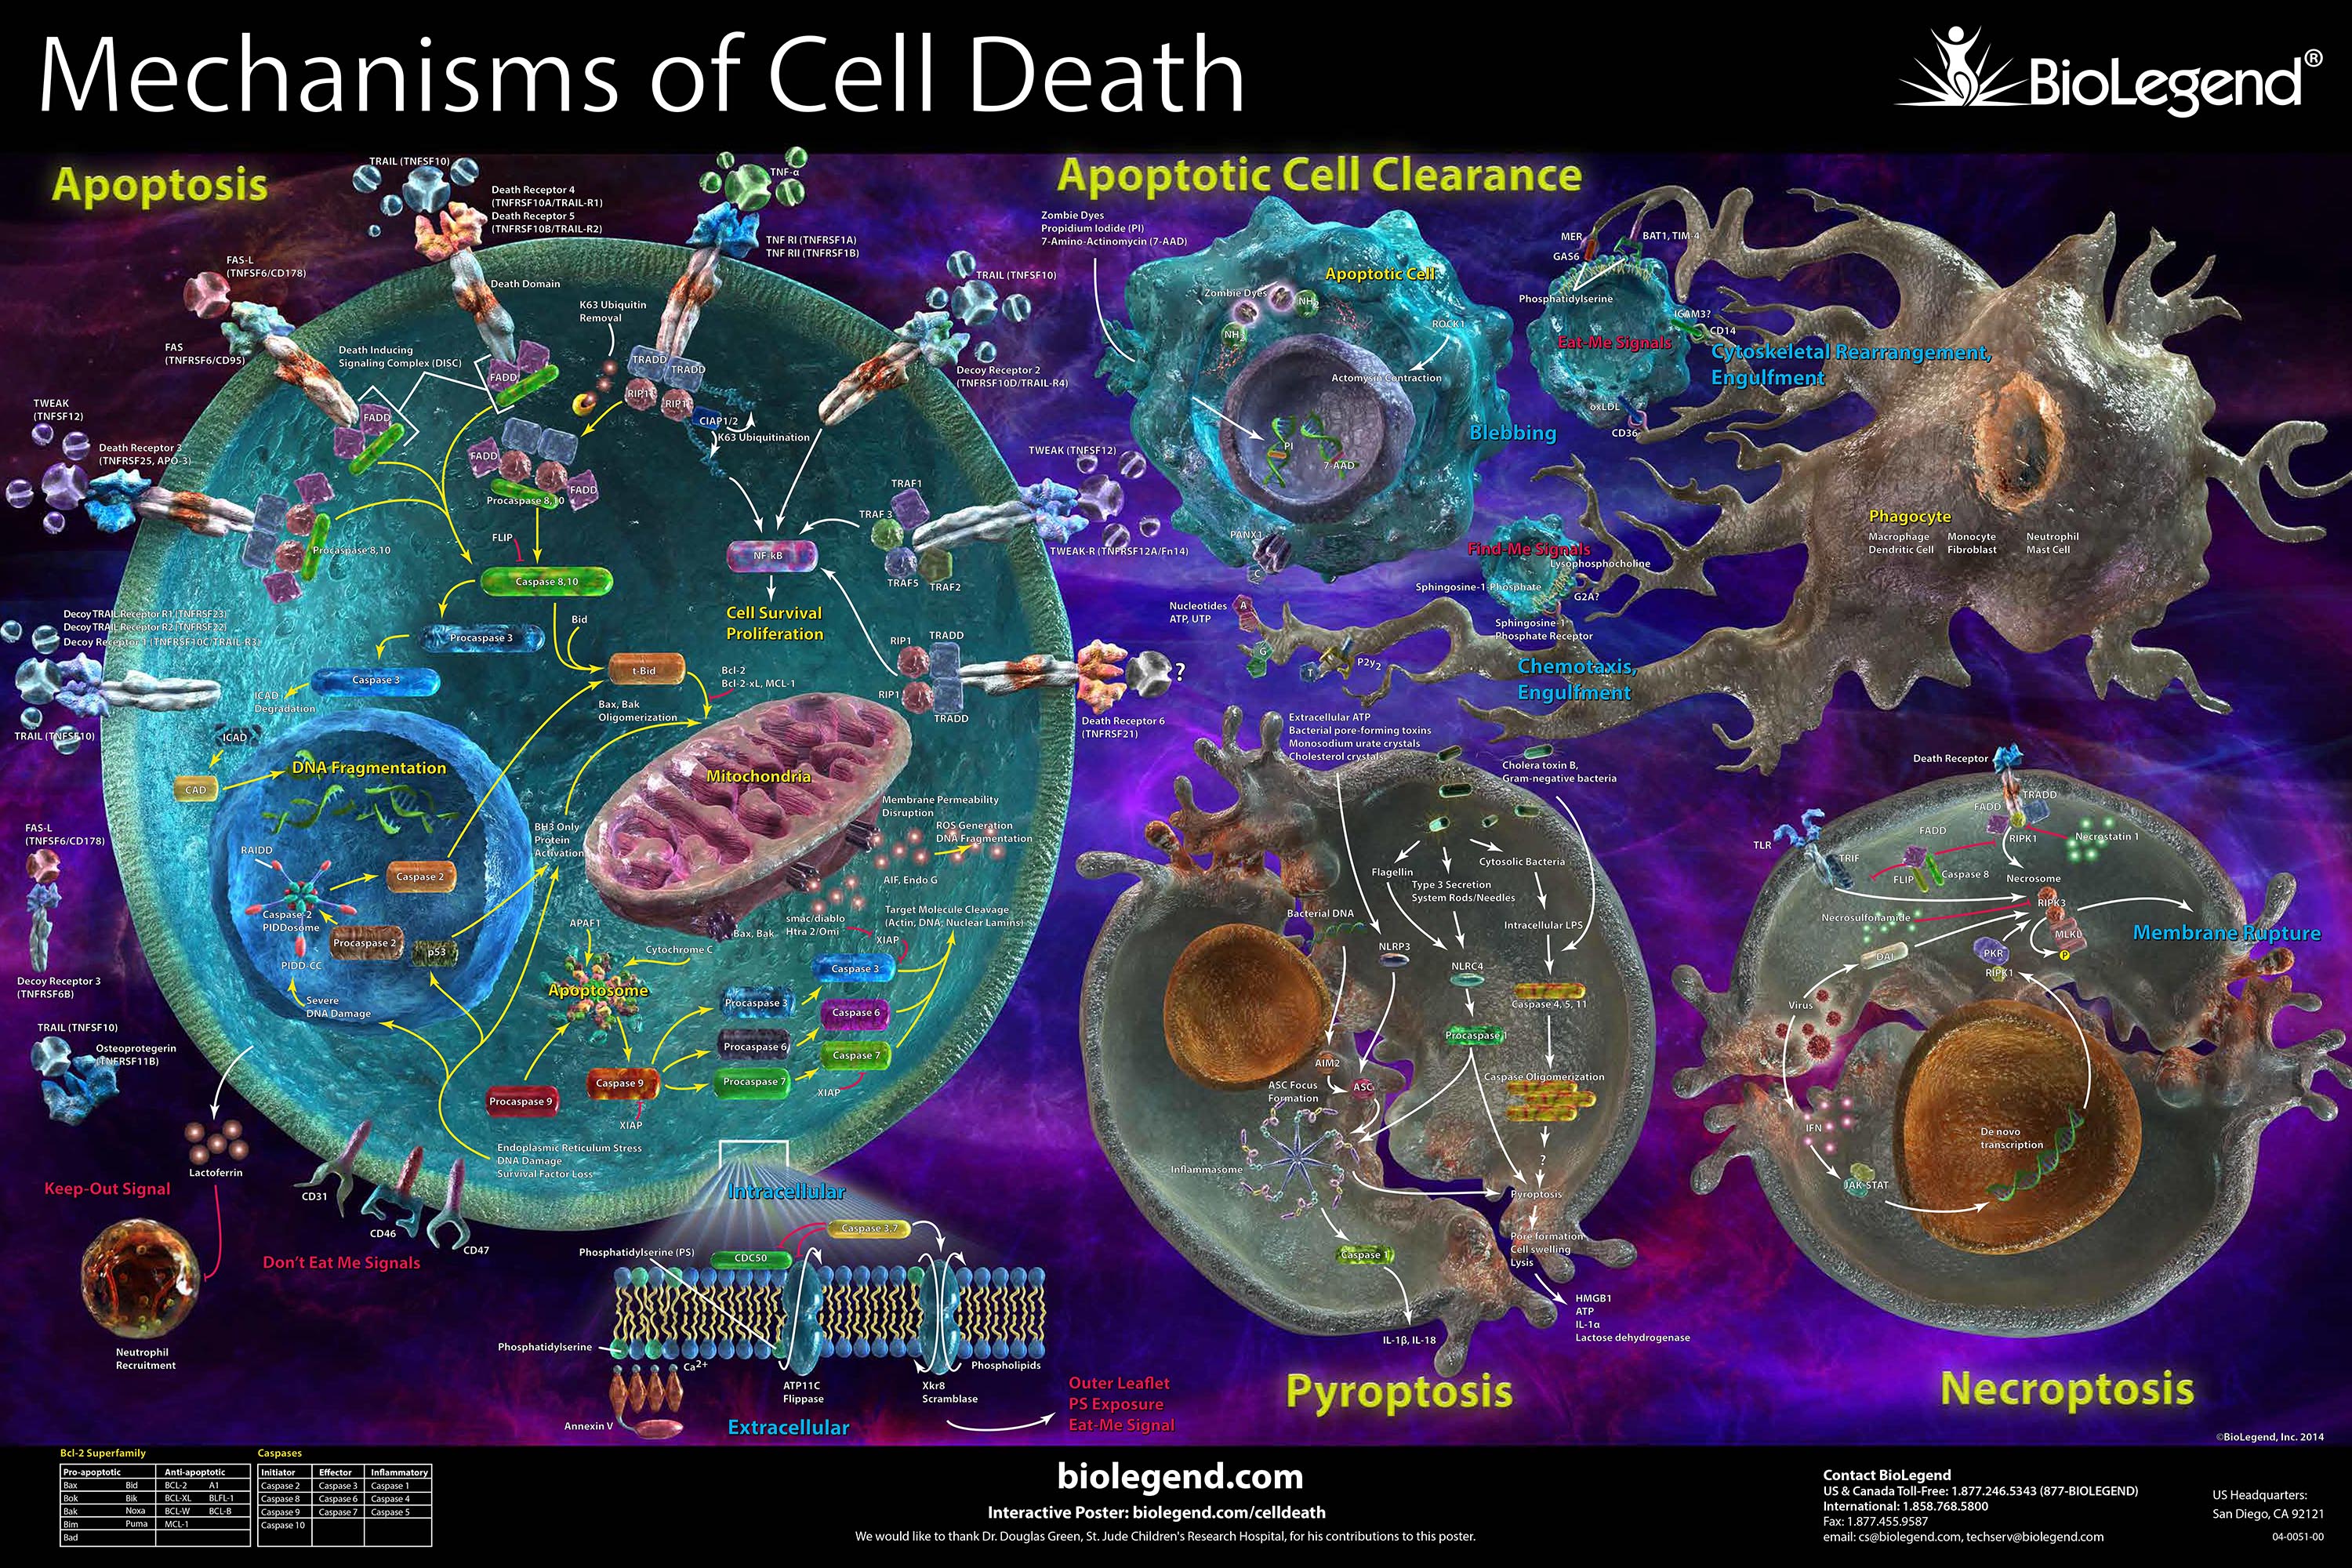 Request a copy of our Mechanisms of Cell Death Poster